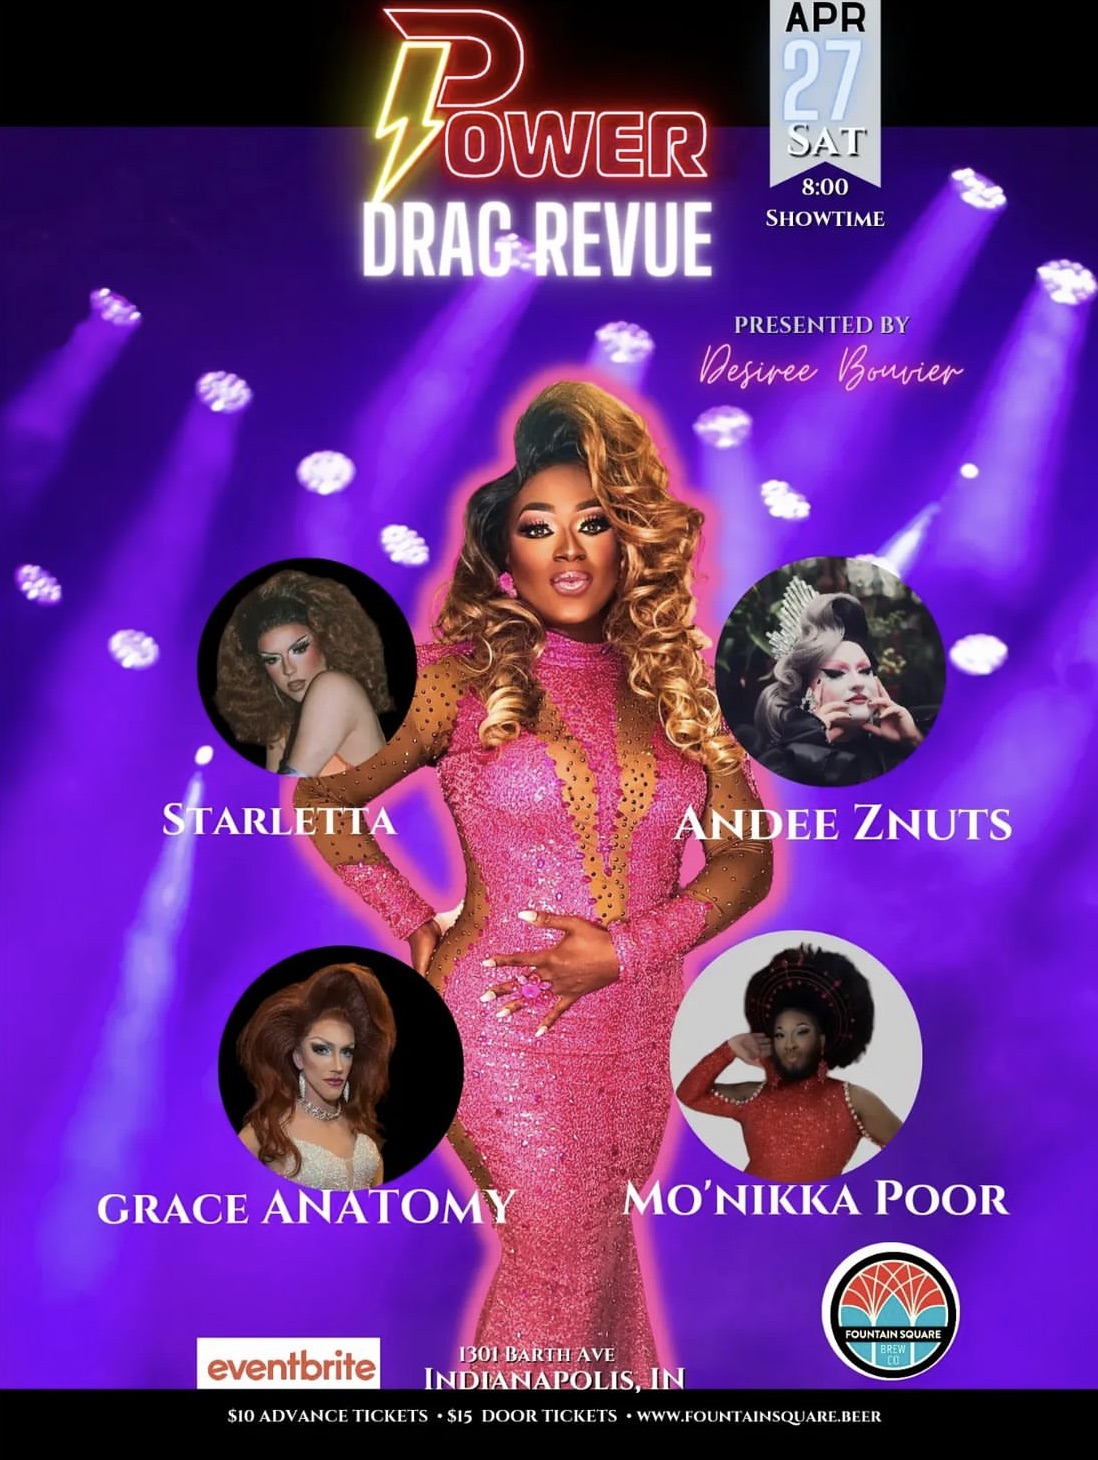 Power: Drag Revue returns to Fountain Square Brewing on Saturday, April 27 at 8. $10 presale tickets or $15 at the door. 21+